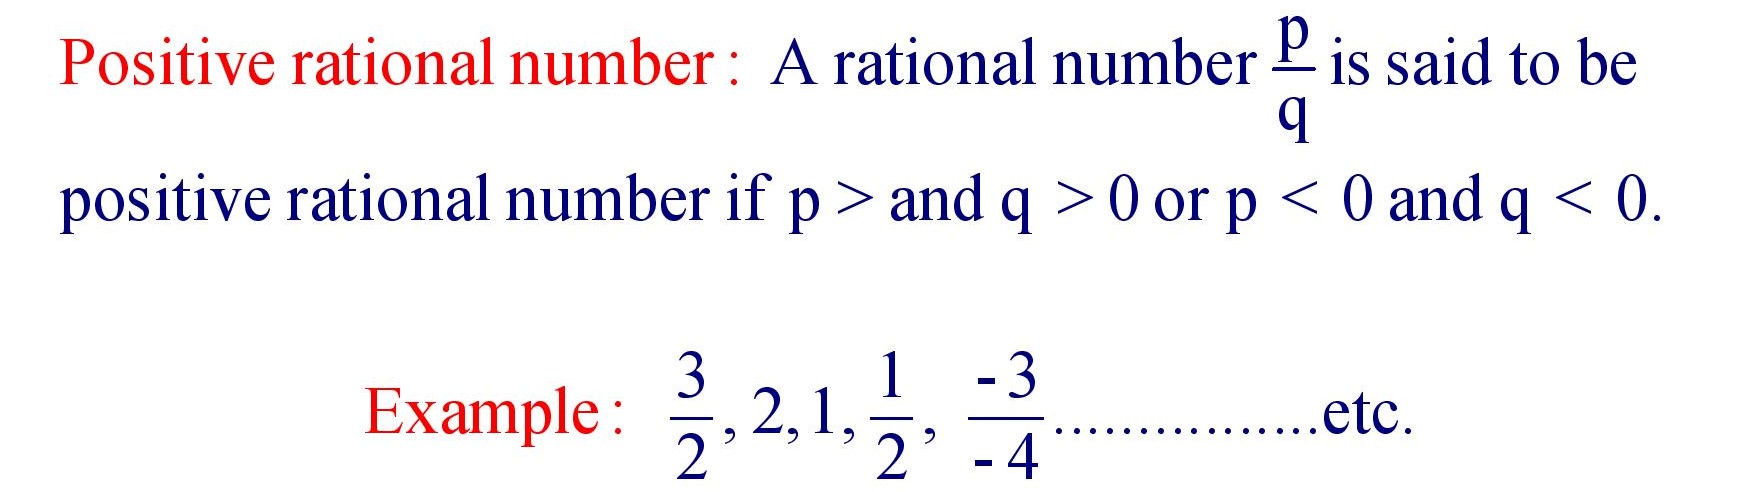 Positive Rational Number